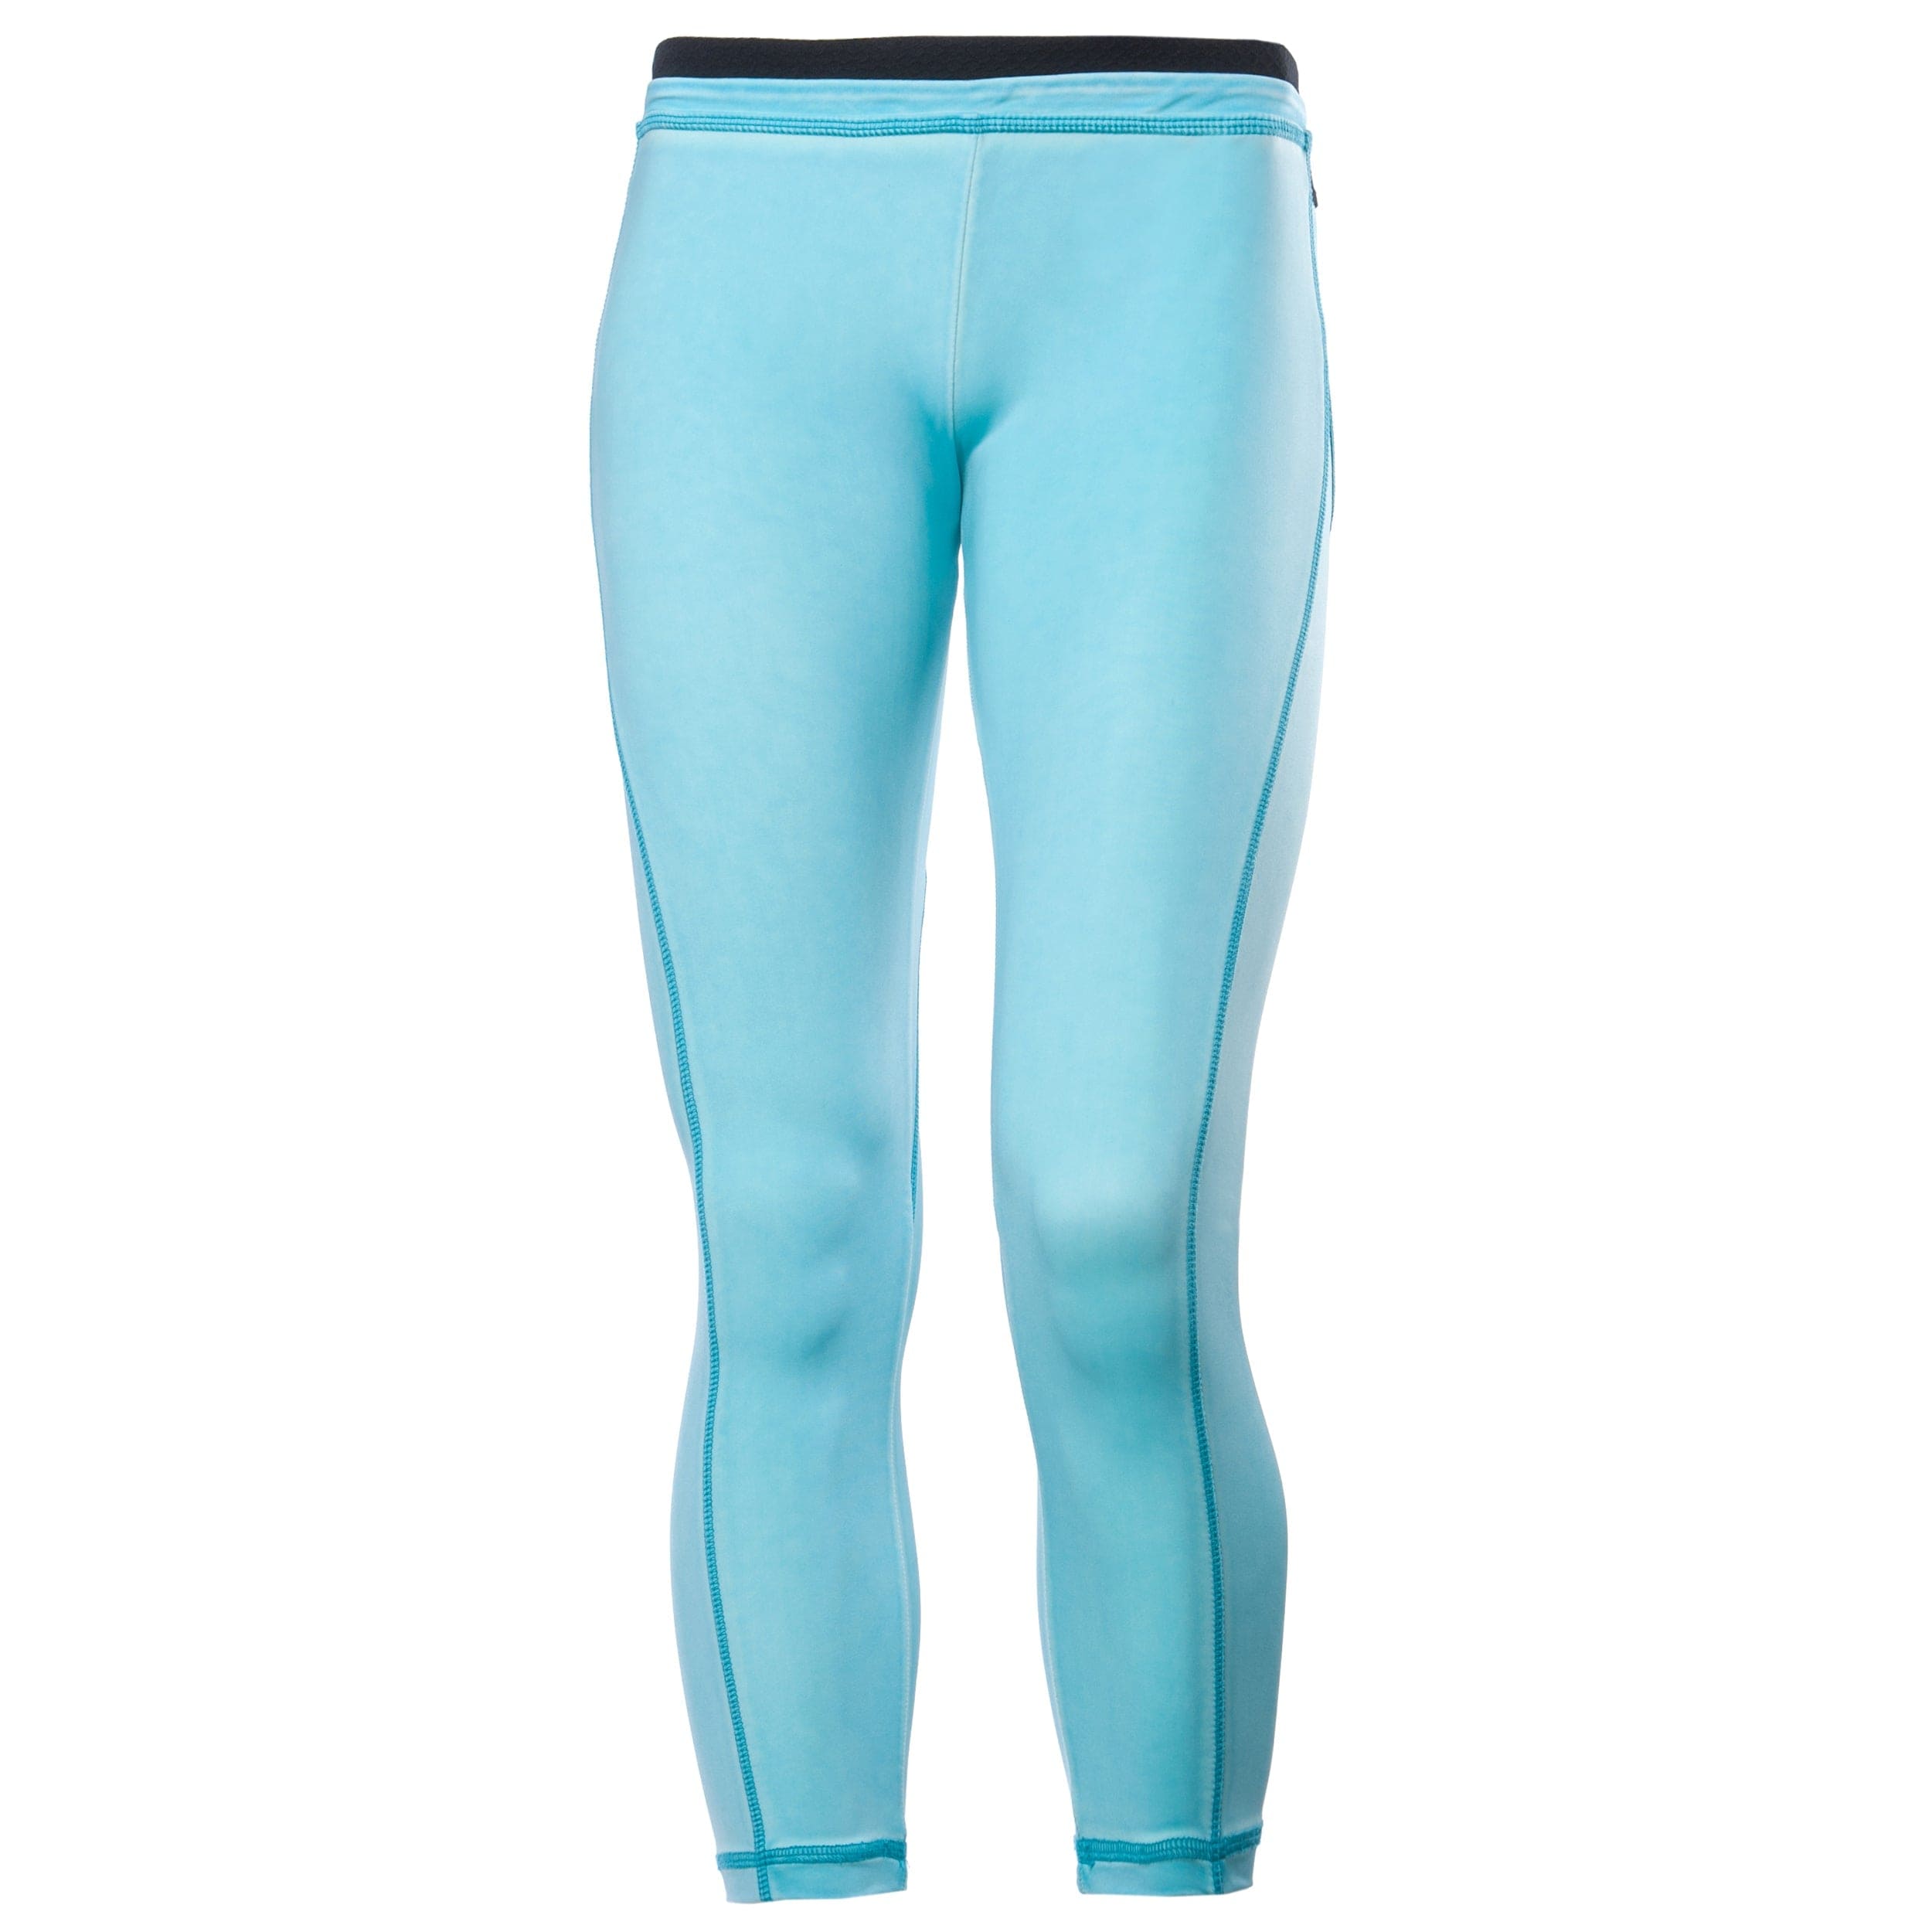 WR.UP® Activewear - Low Waist – 7/8 Length - Turquoise 2